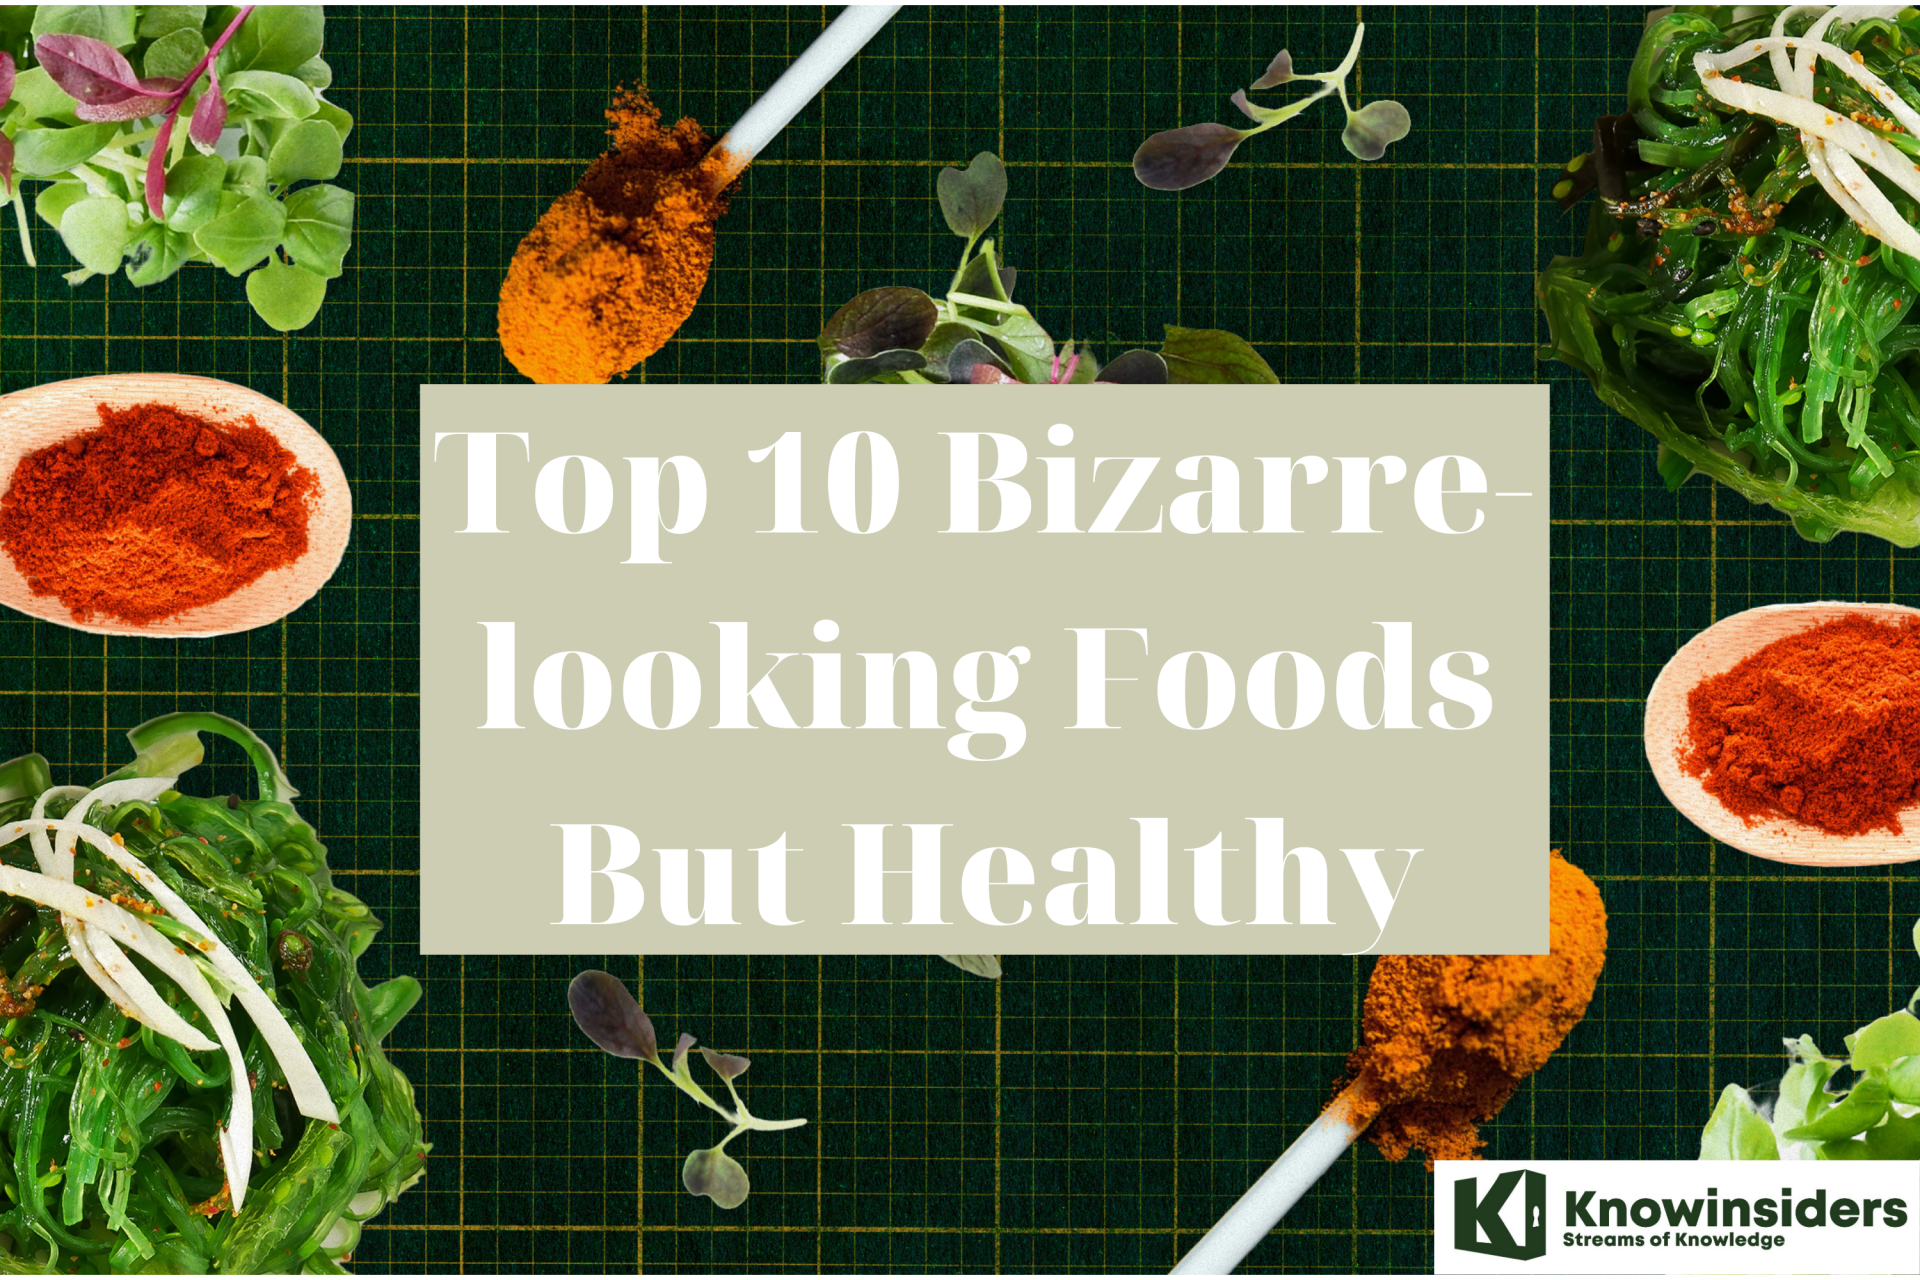 Top 10 Bizarre-Looking Foods But Absolutely Healthy